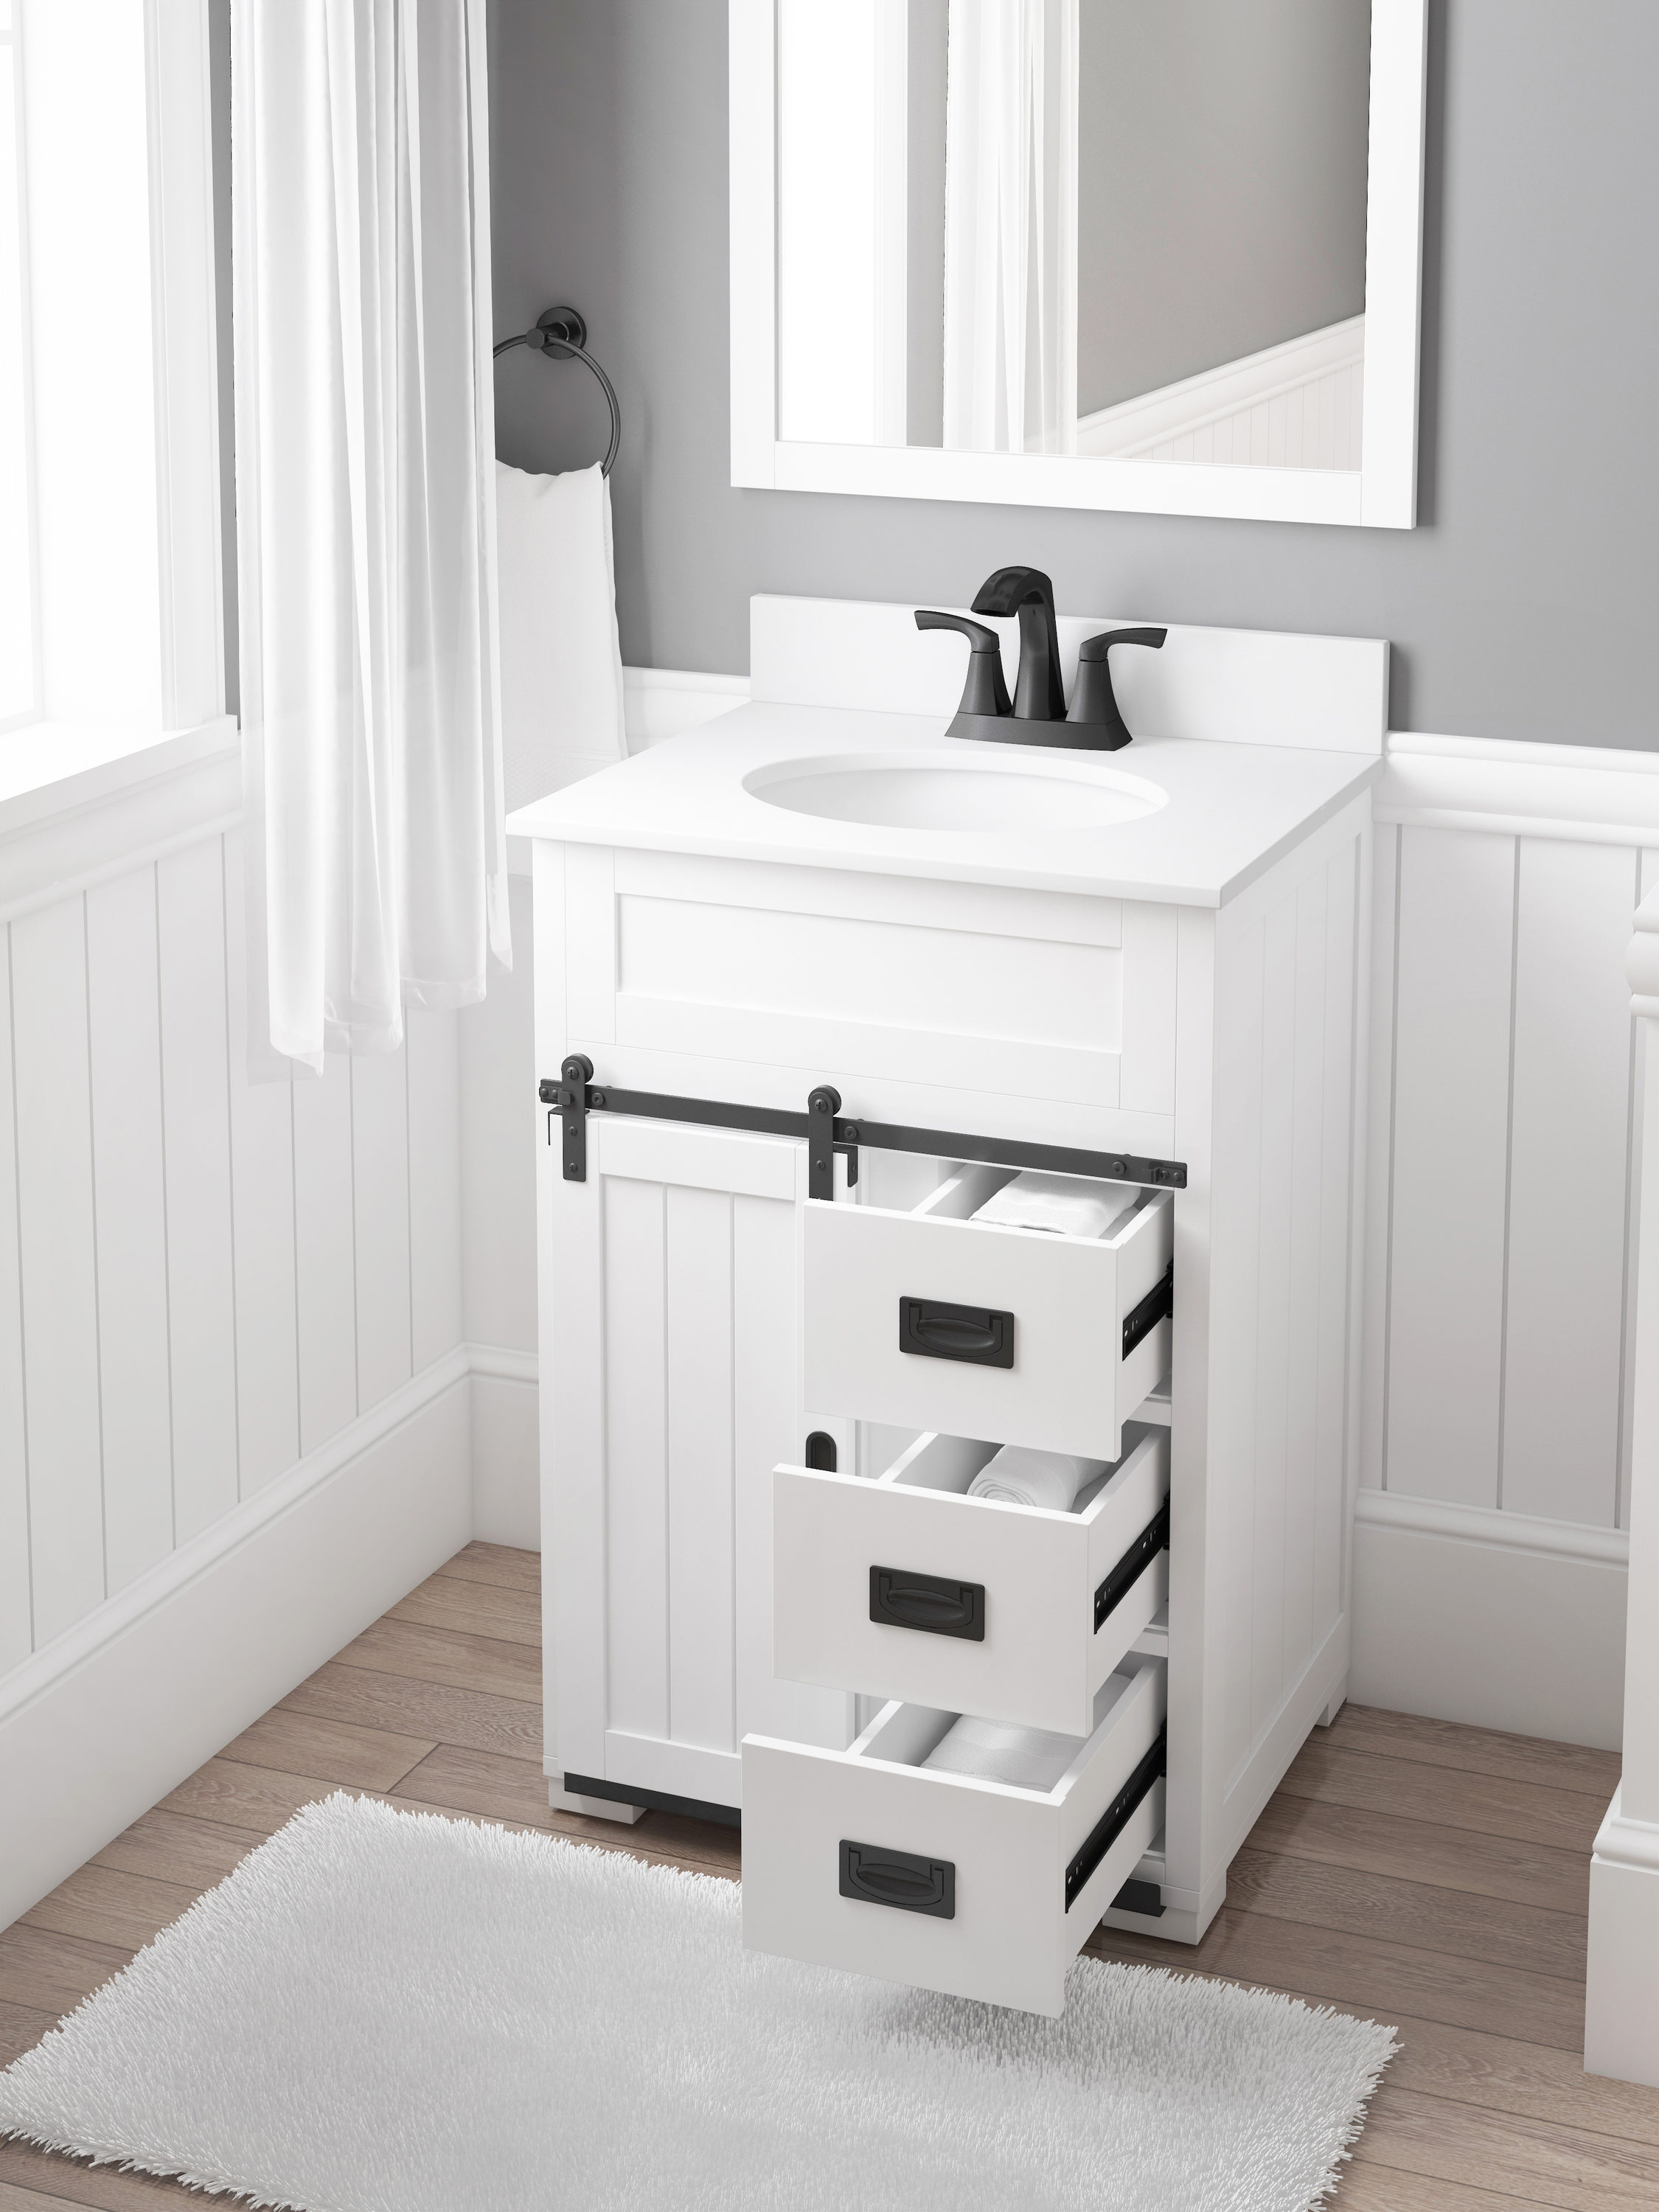 Get all the information you'll need on white bathroom vanities, and get  ready to install a crisp and conveni…